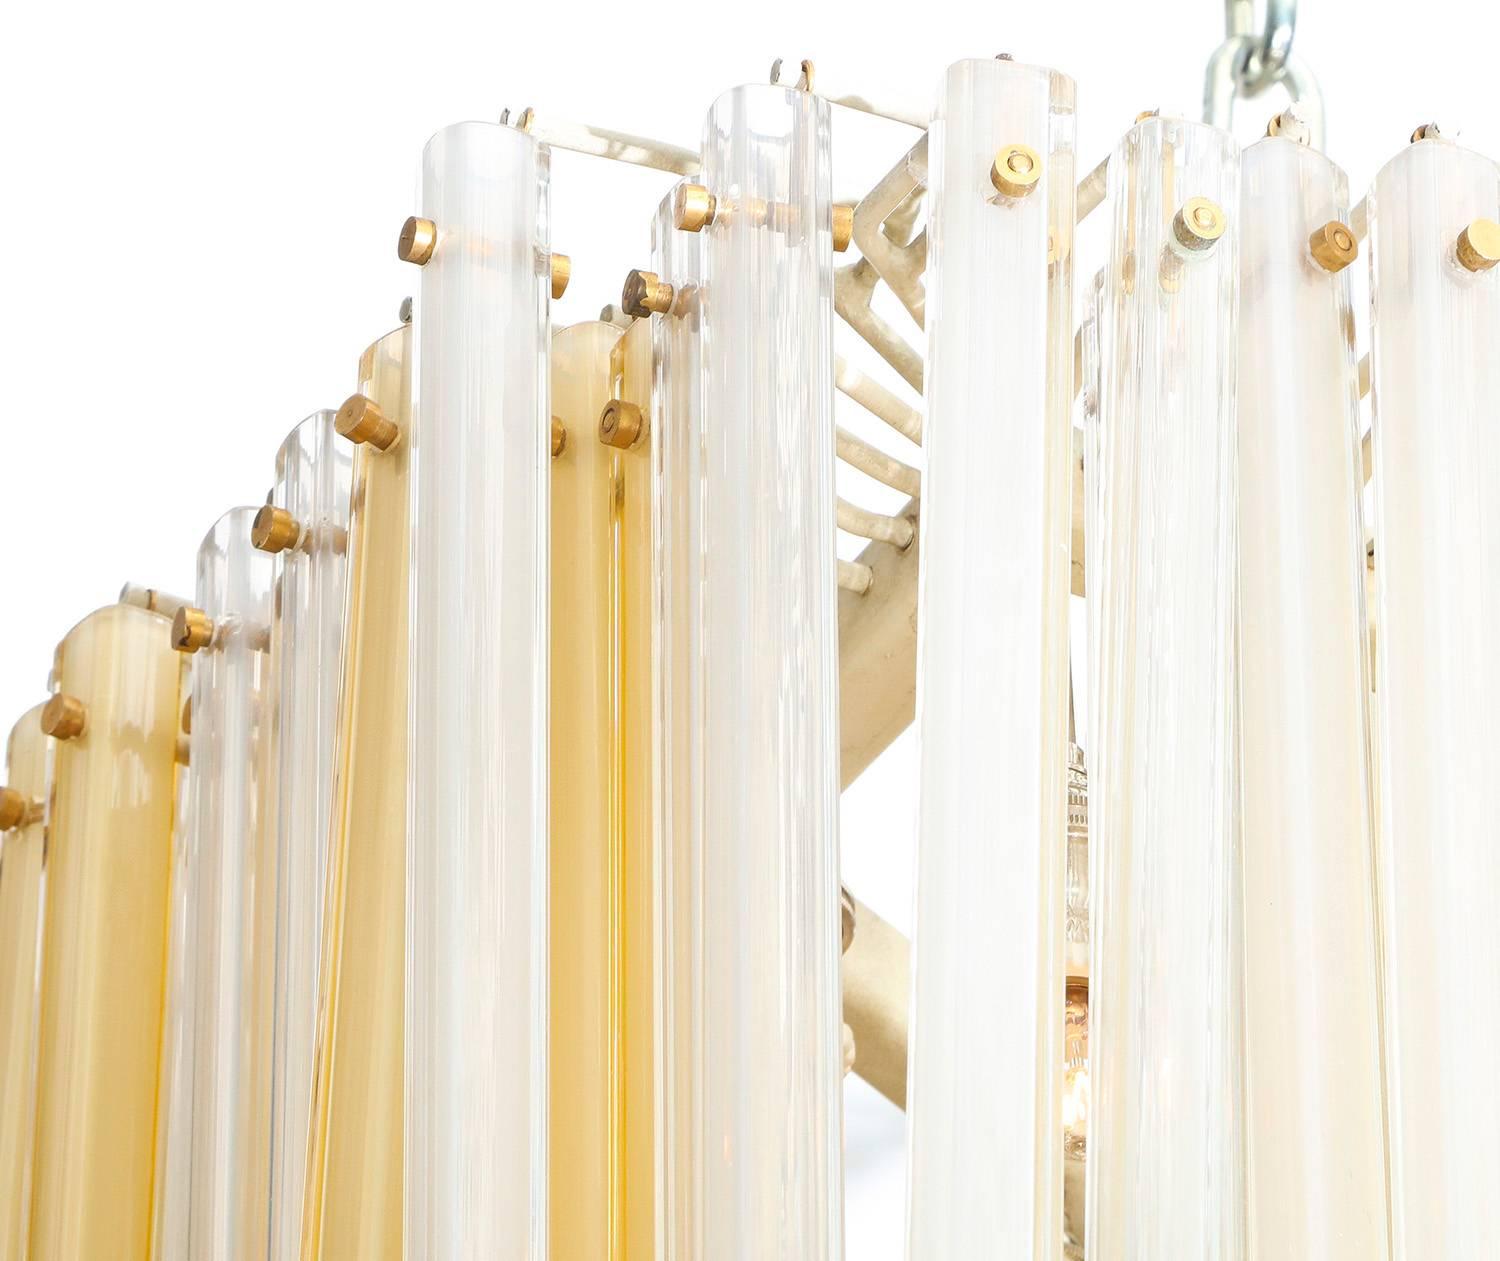 Rare multi-tube hanging light by Venini. Unusual form with hanging glass tubes in satin yellow and clear. 16 candelabra sockets. All new sockets and wiring.